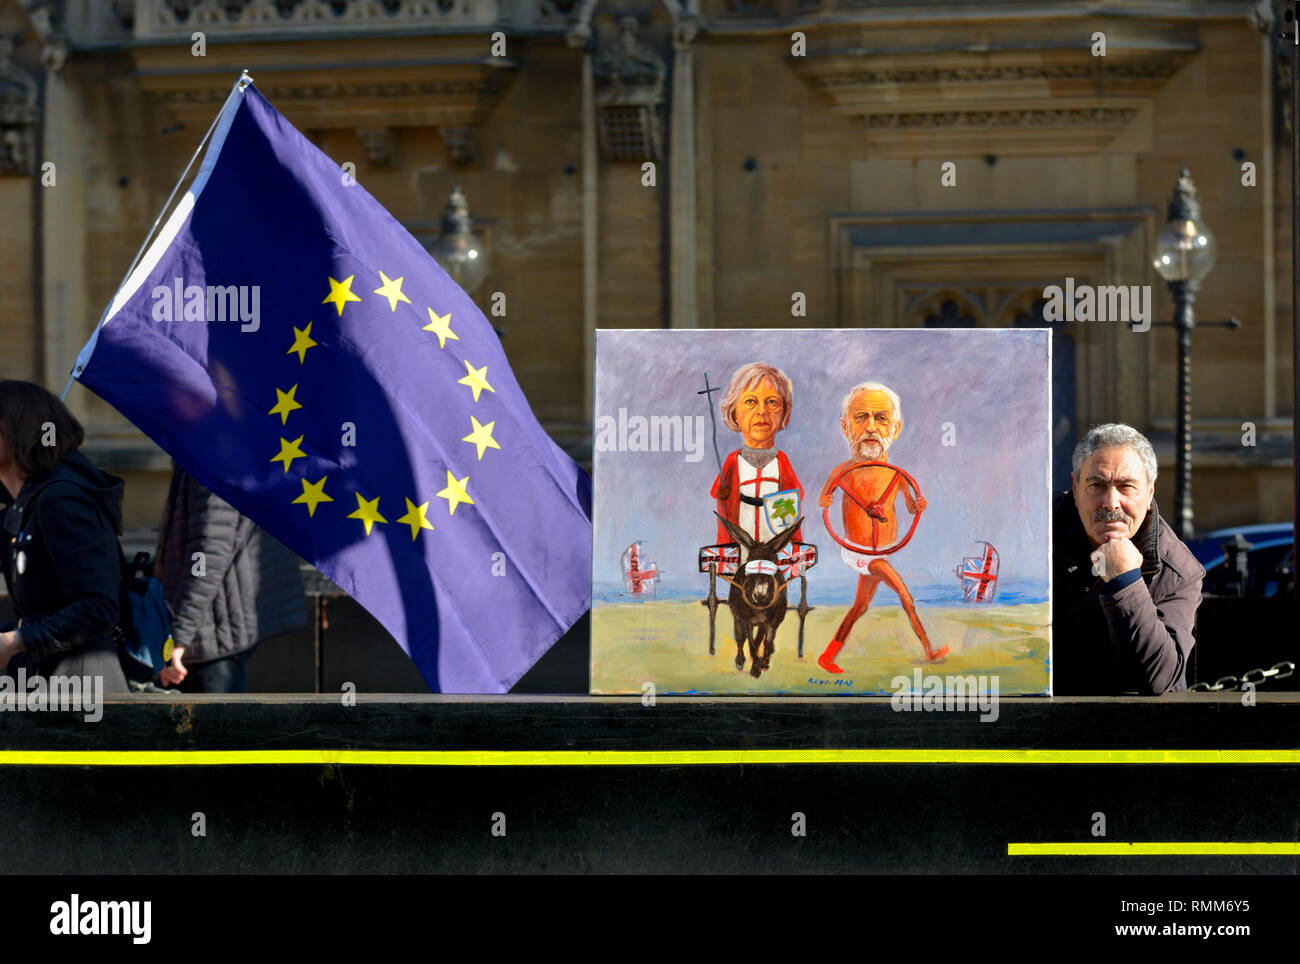 Kaya Mar - Turkish political cartoonist - with his new Brexit painting of PM Theresa May and Jeremy Corbyn. 14th Feb 2019 Stock Photo